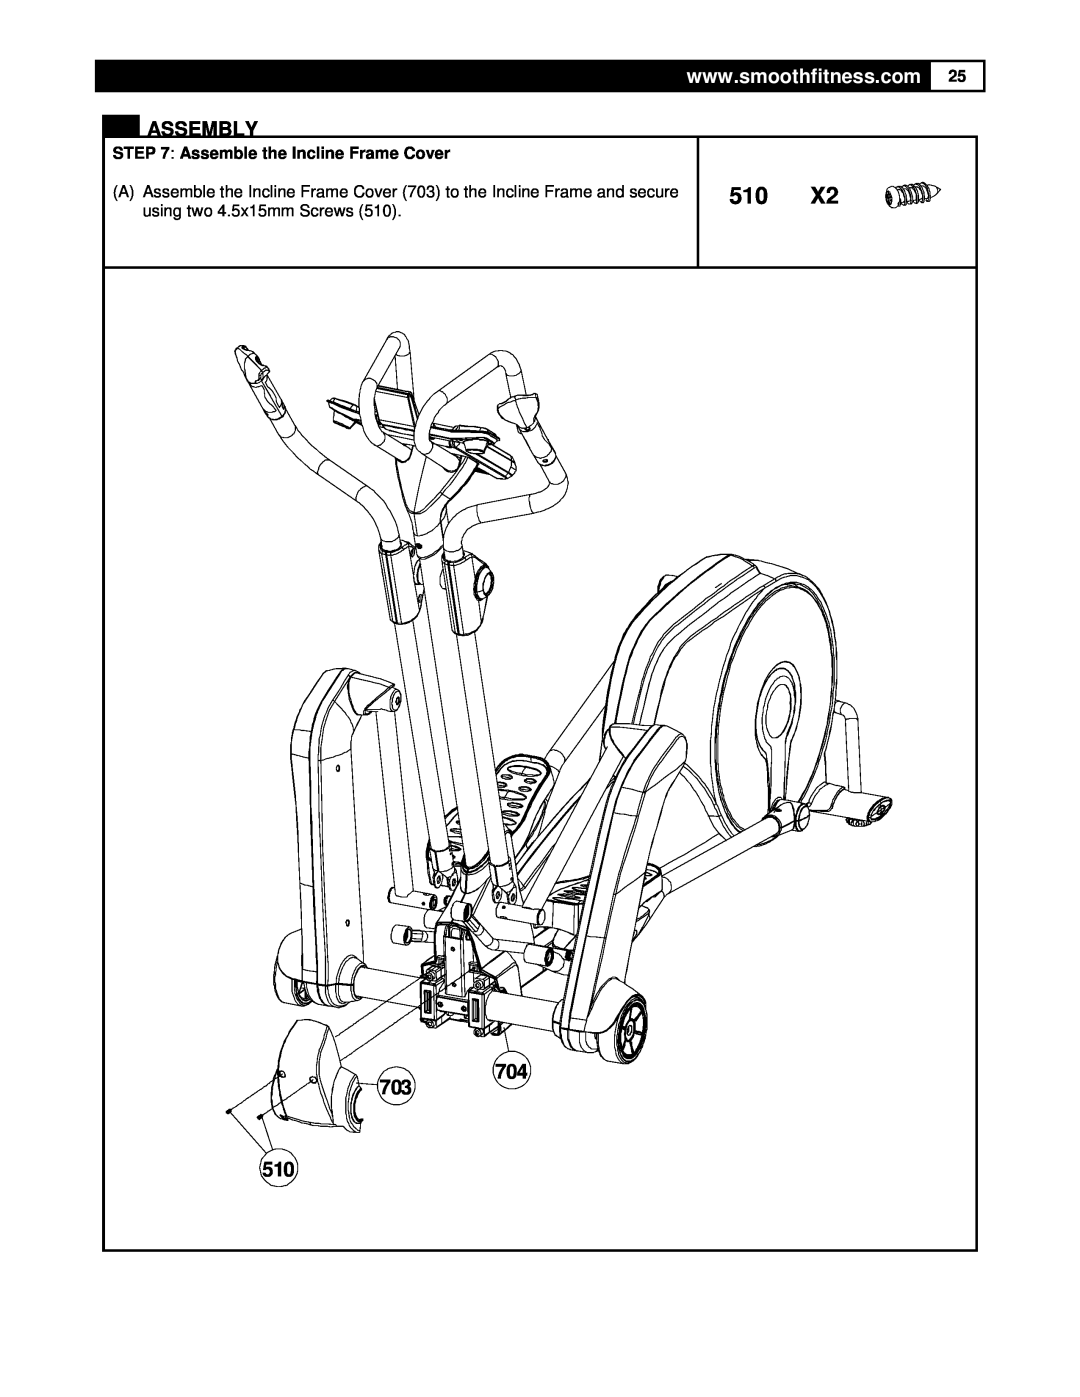 Smooth Fitness DMT X2 user manual Assembly, Assemble the Incline Frame Cover 